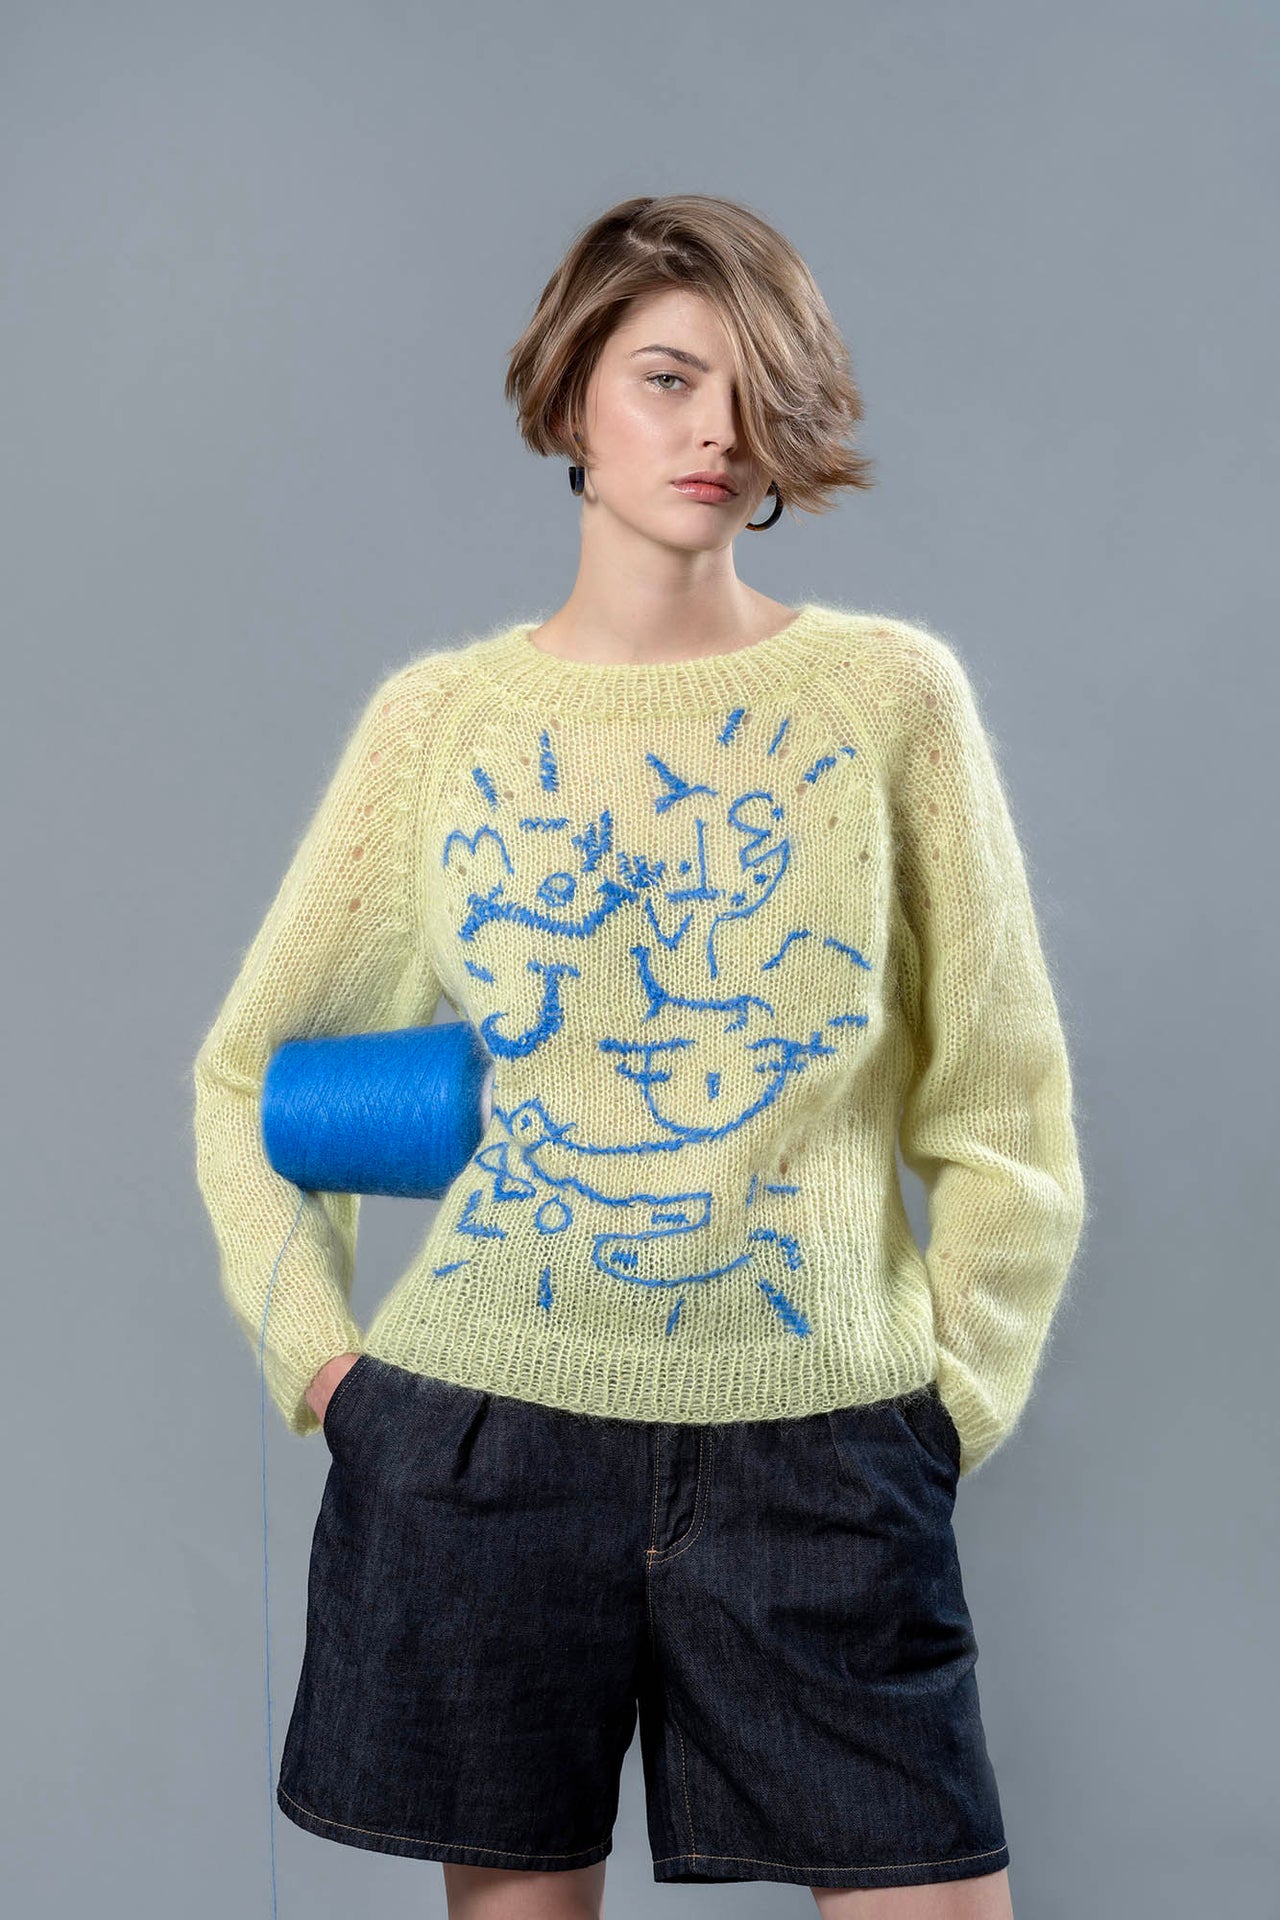 Woman wearing lime coloured mohair sweater and carrying blue wool cone under the arm. The sweater is adorned with sky blue abstract embroidered shapes. 